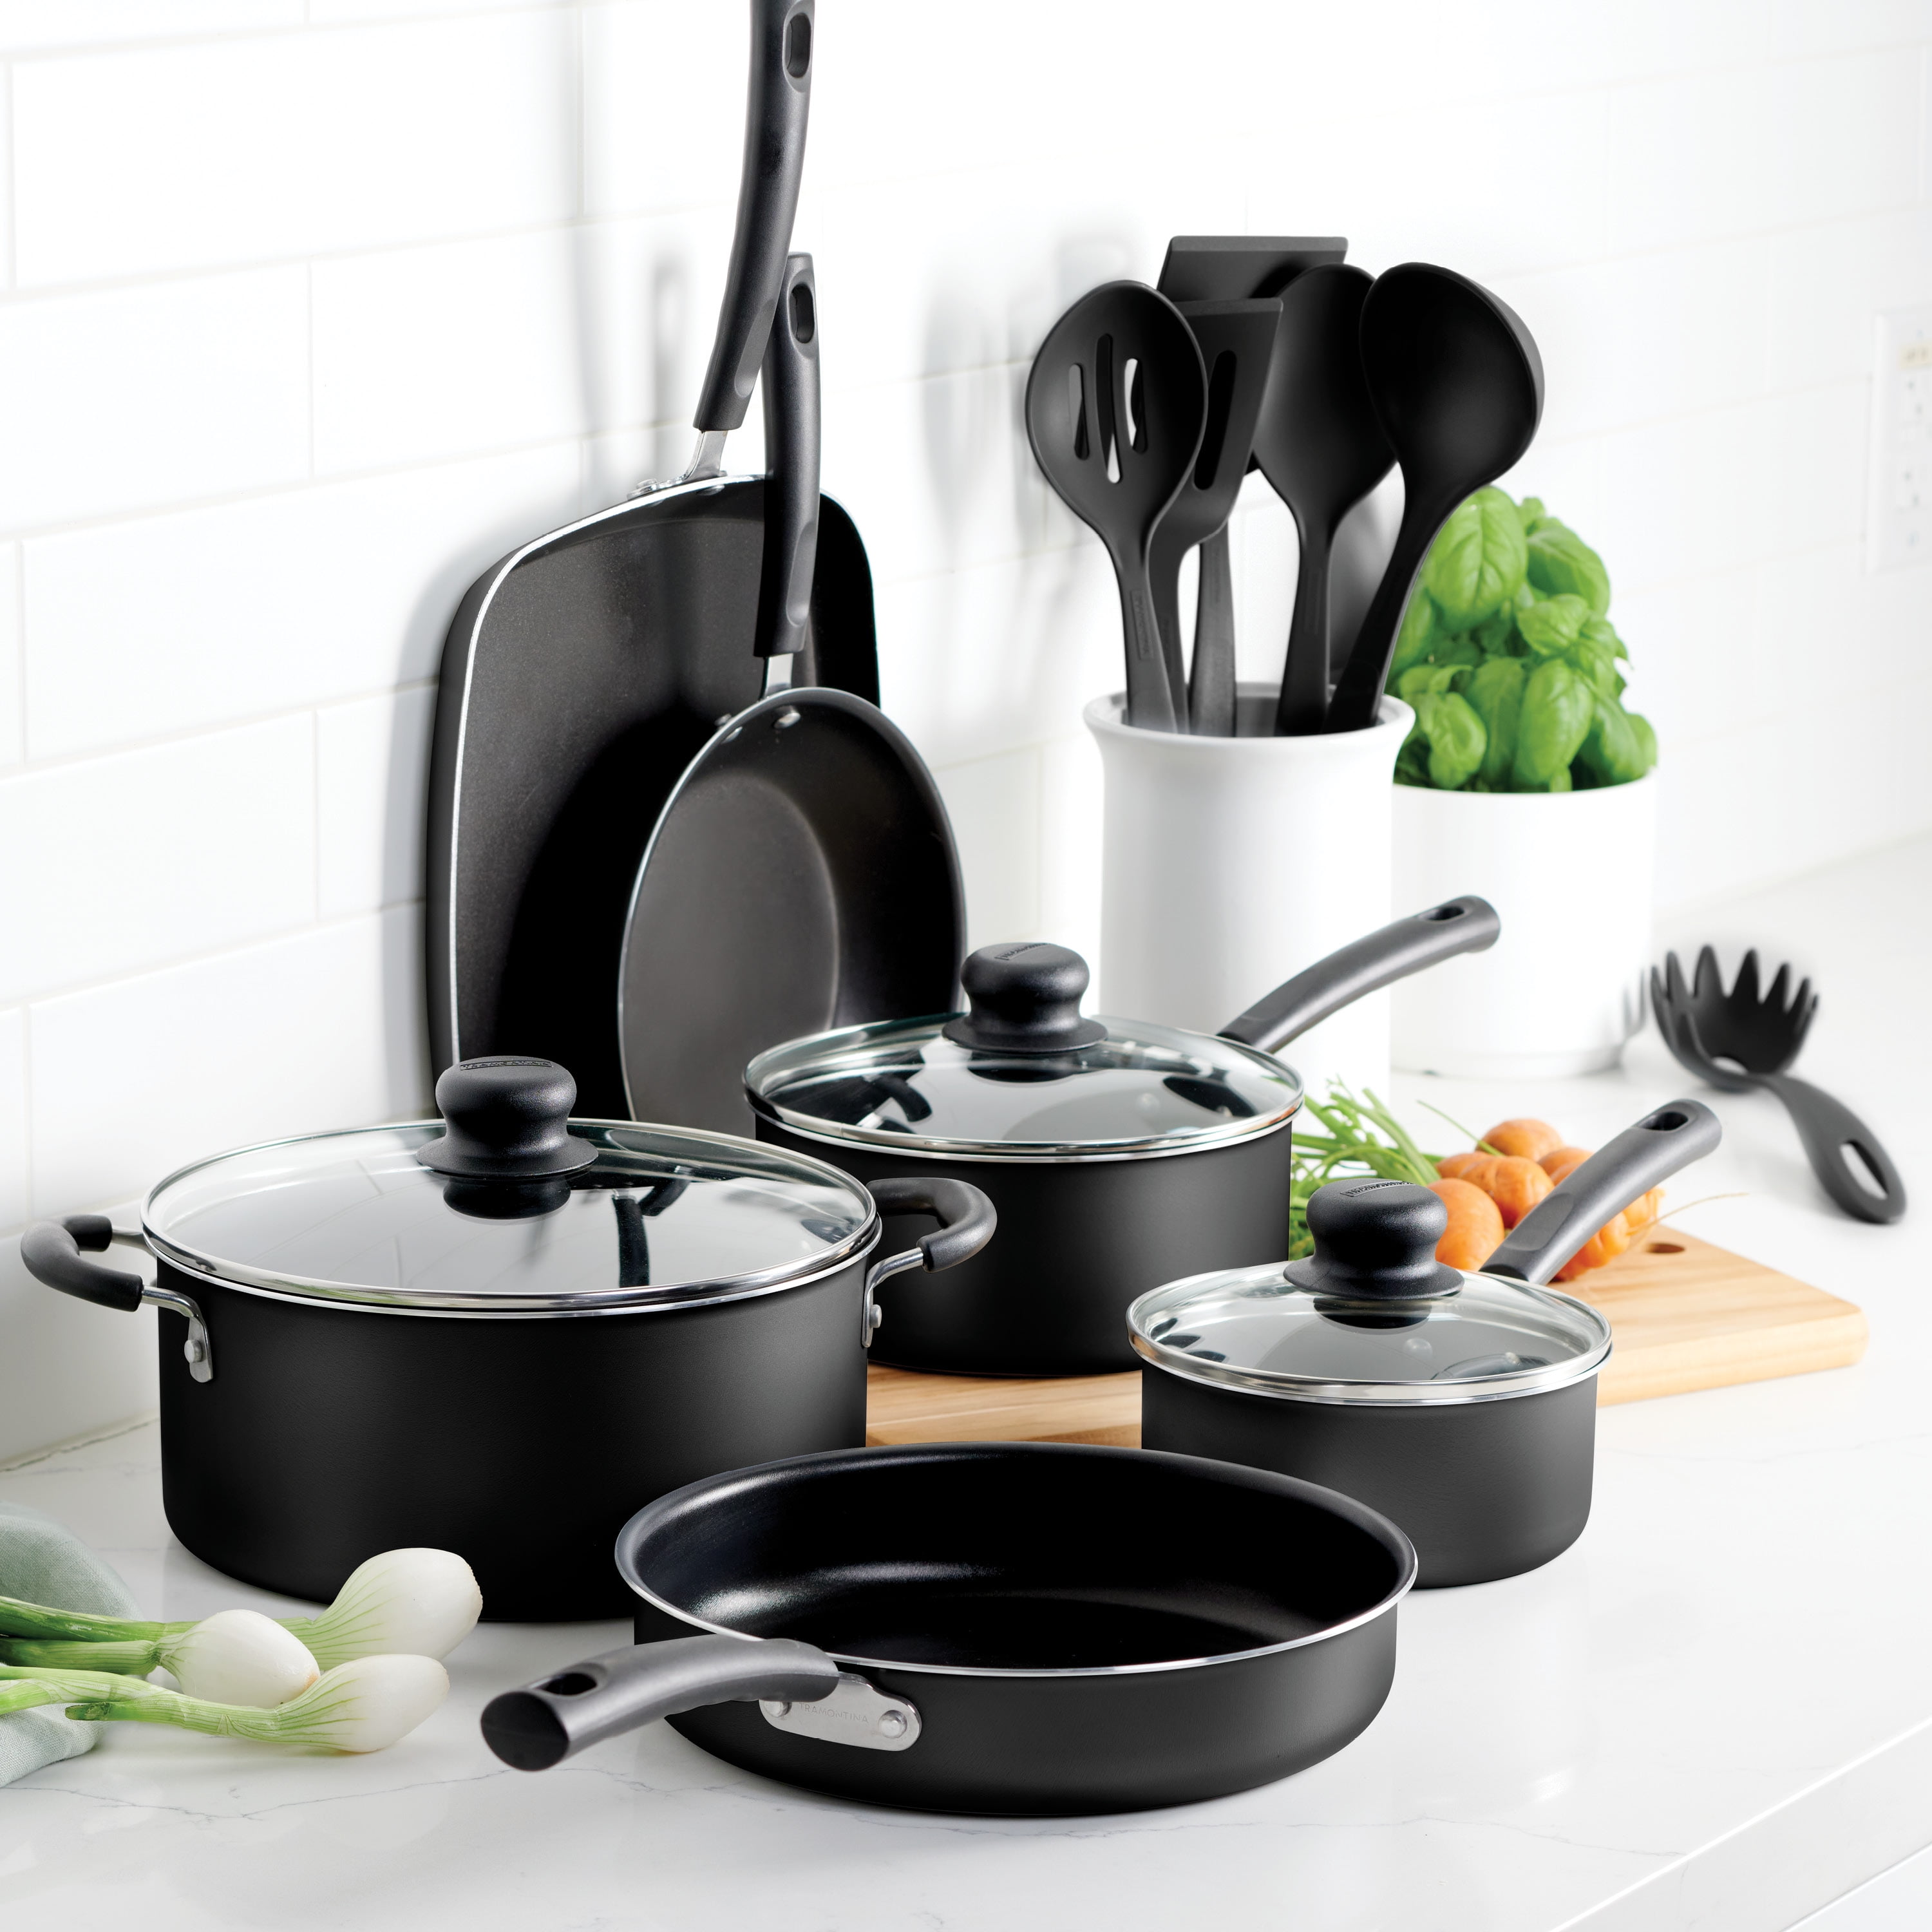 This 15-piece hard anodized cookware set is part of Tramontina's